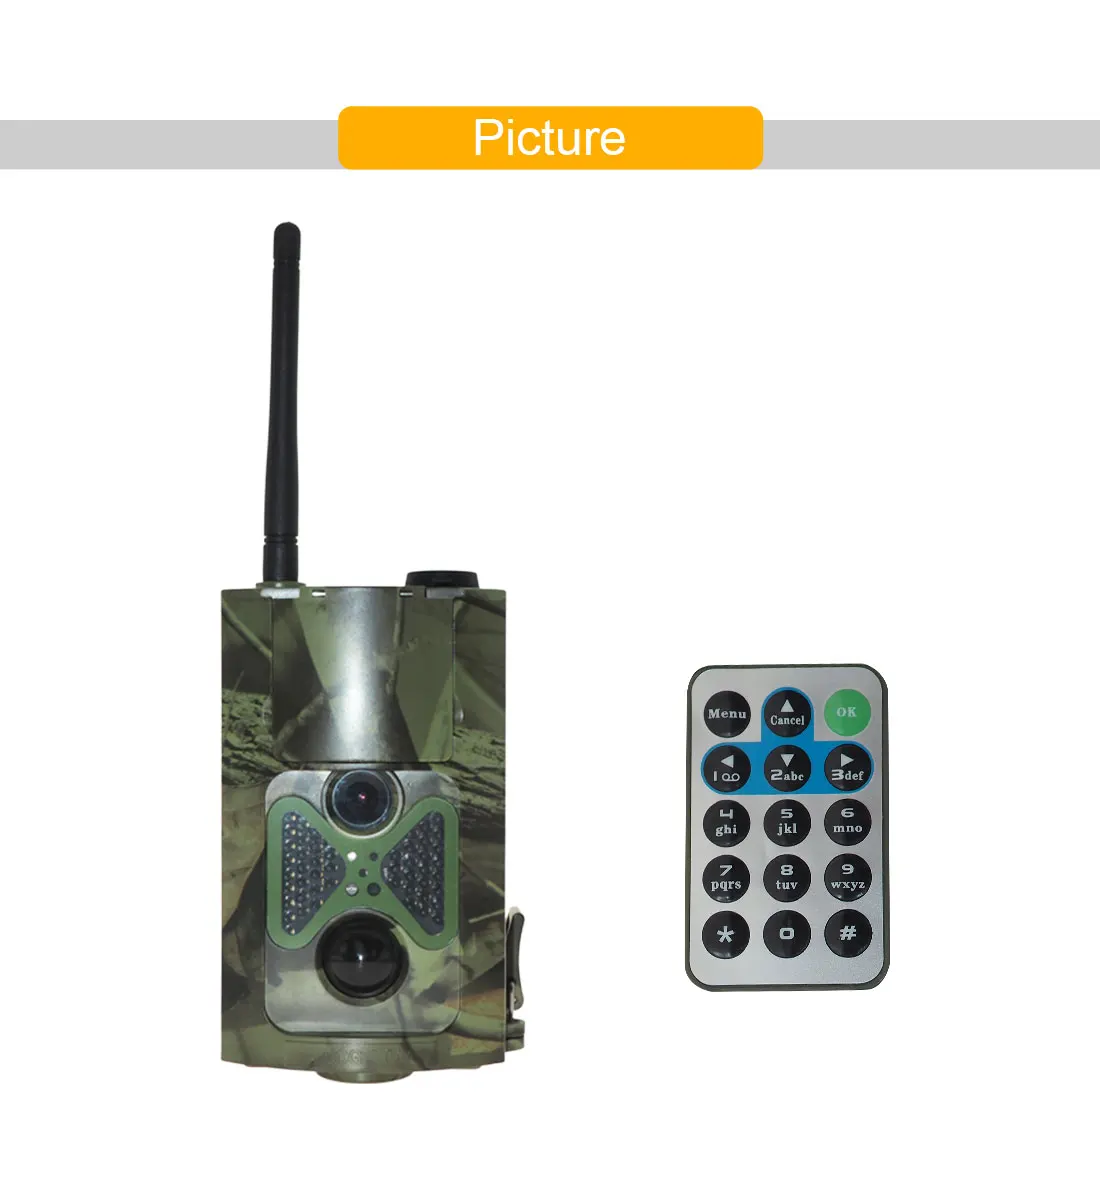 
HDKing 3G Hunting Camer 12MP 0.3 Second Trigger Time Trail Camera IP66 Waterproof with Remote Control 